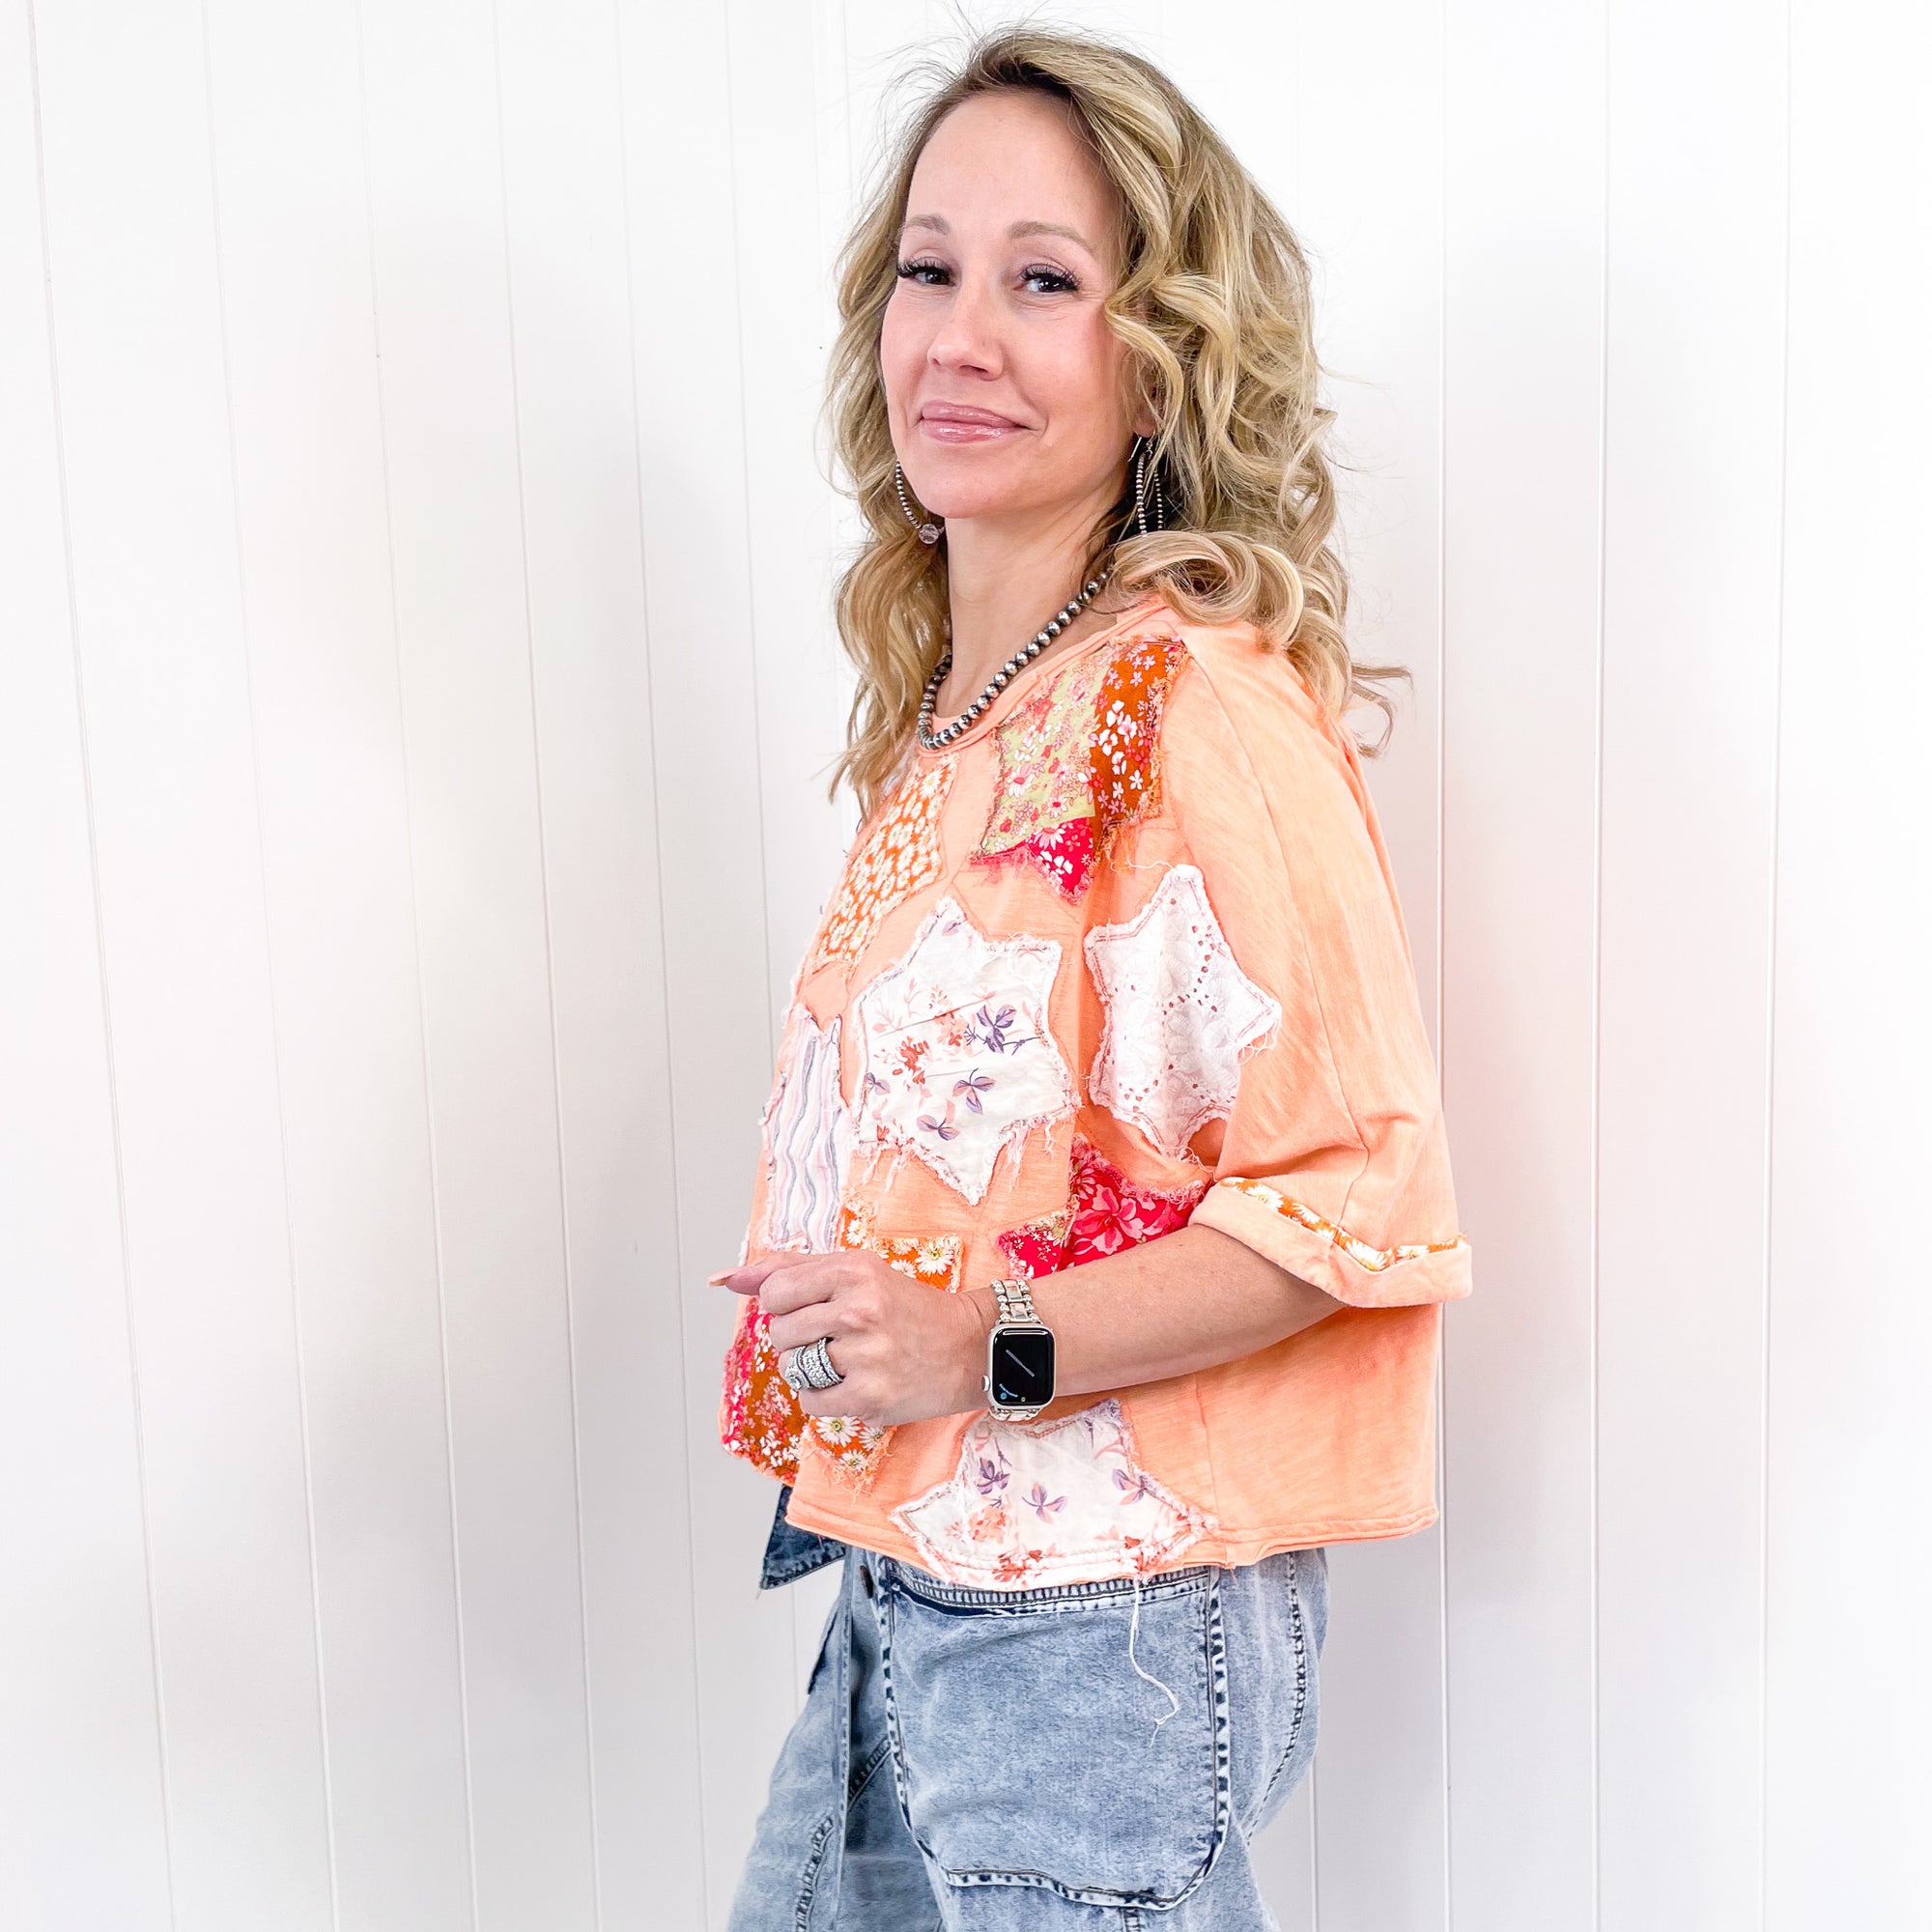 Quilt Patch Gypsy Soul Star Washed Orange Short Sleeve Top - Boujee Boutique 